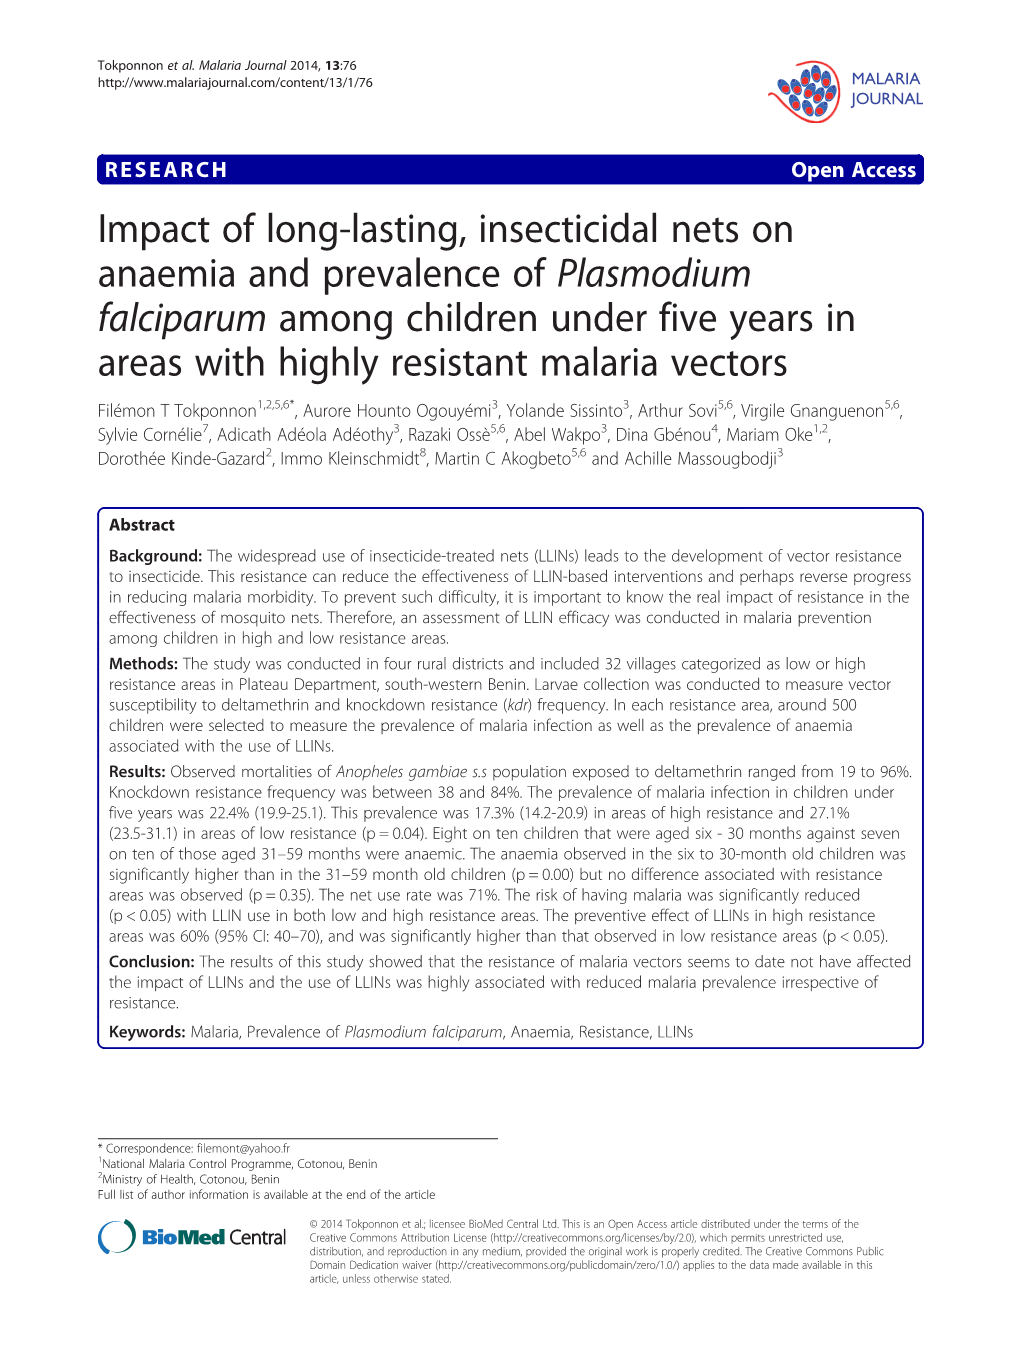 Impact of Long-Lasting, Insecticidal Nets on Anaemia and Prevalence Of